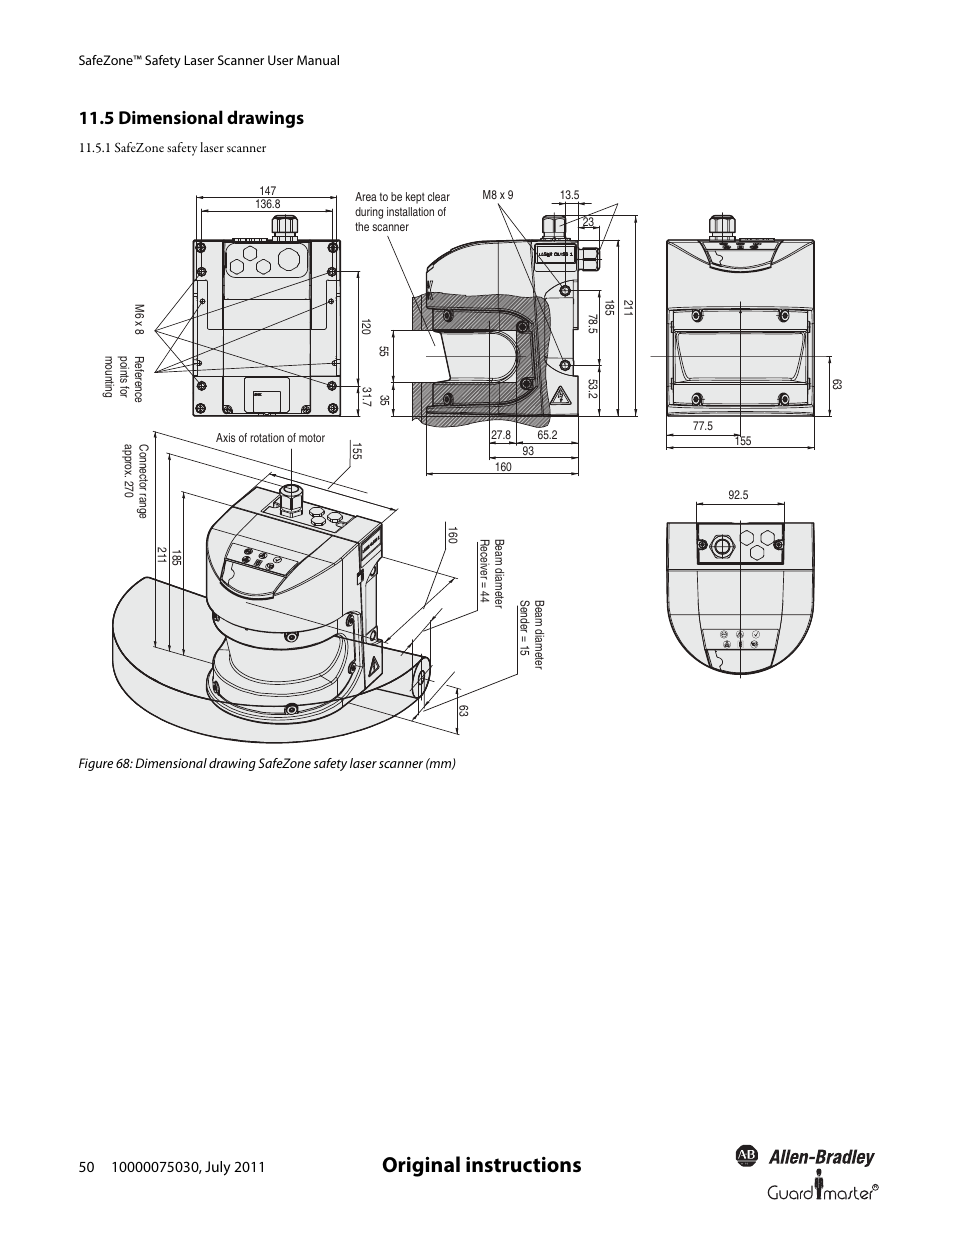 Original instructions, 5 dimensional drawings | Rockwell Automation 442L SafeZone Singlezone & Multizone Safety Laser Scanner User Manual | Page 52 / 60